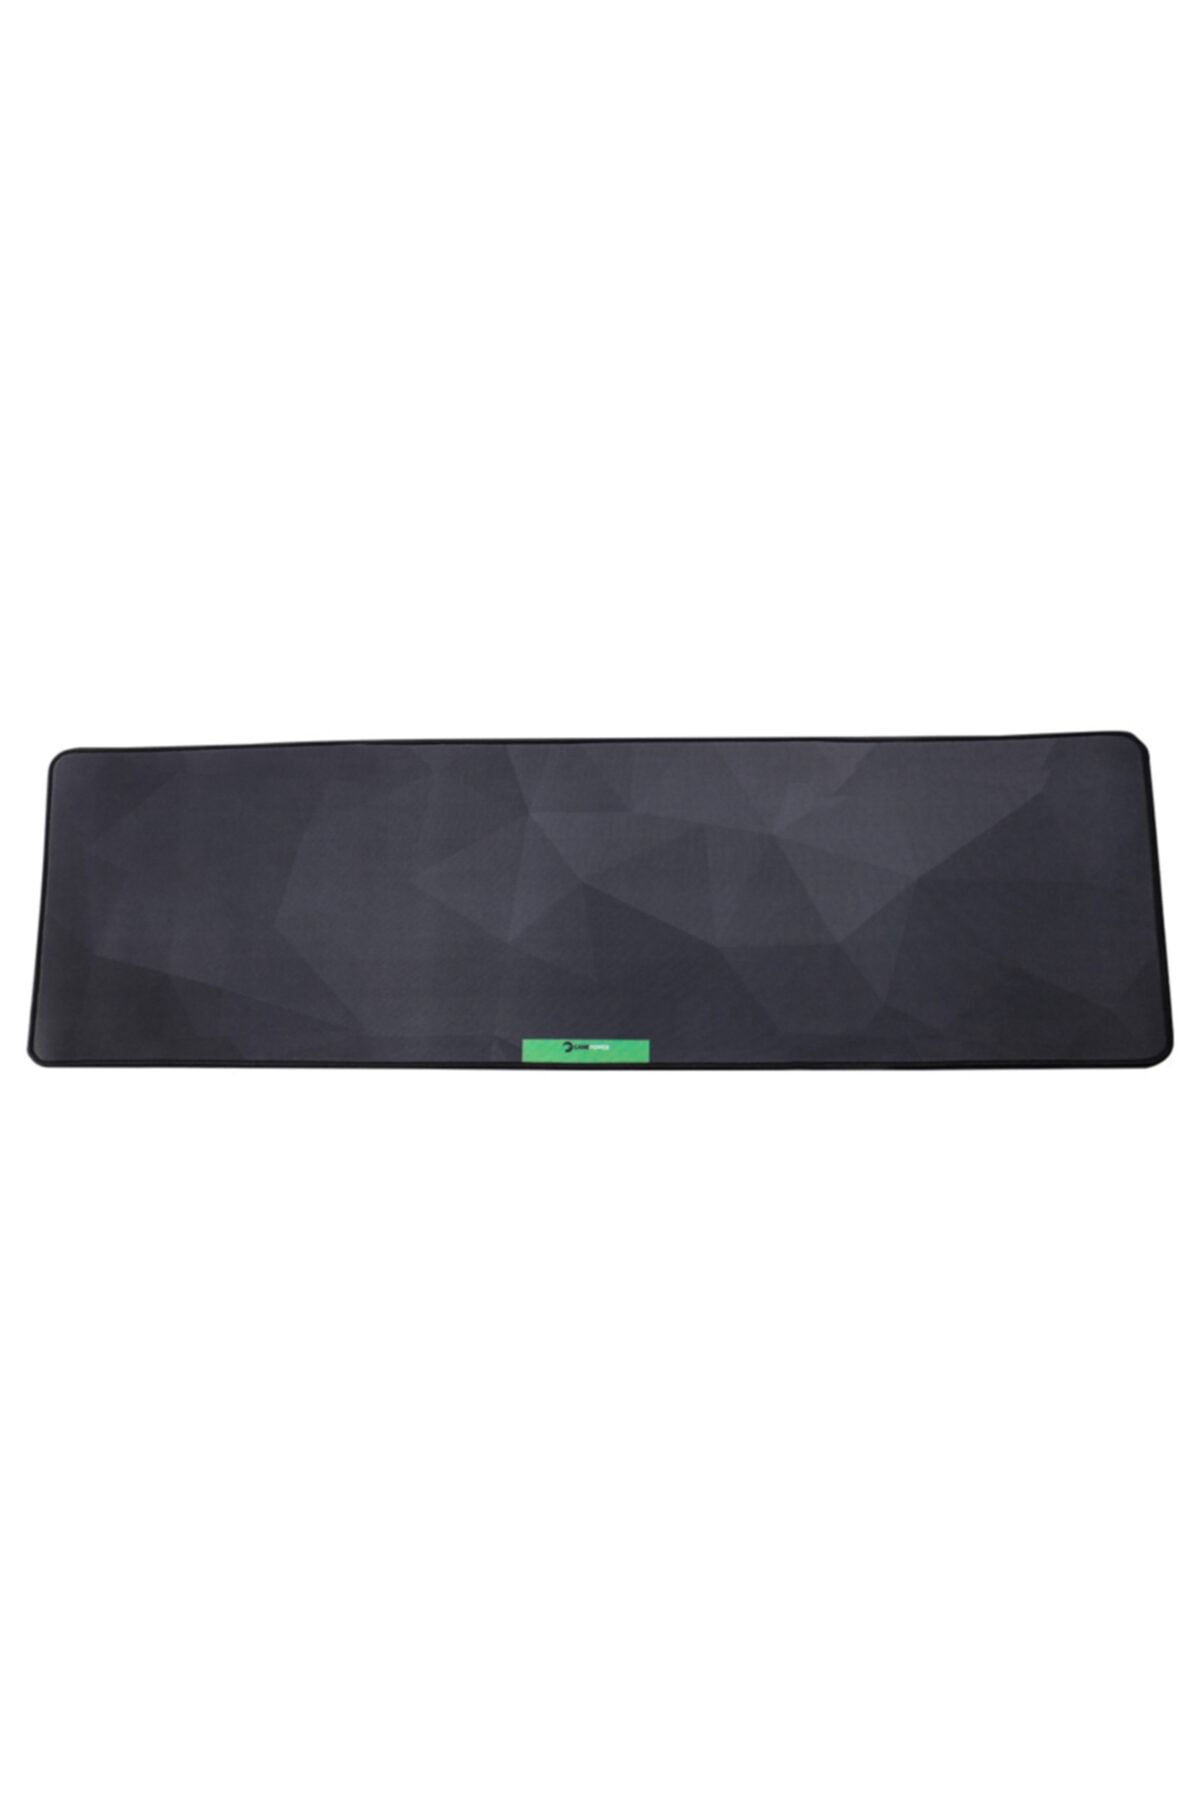 Gamepower Gaming Mouse Pad Gpr900 900*300*4mm